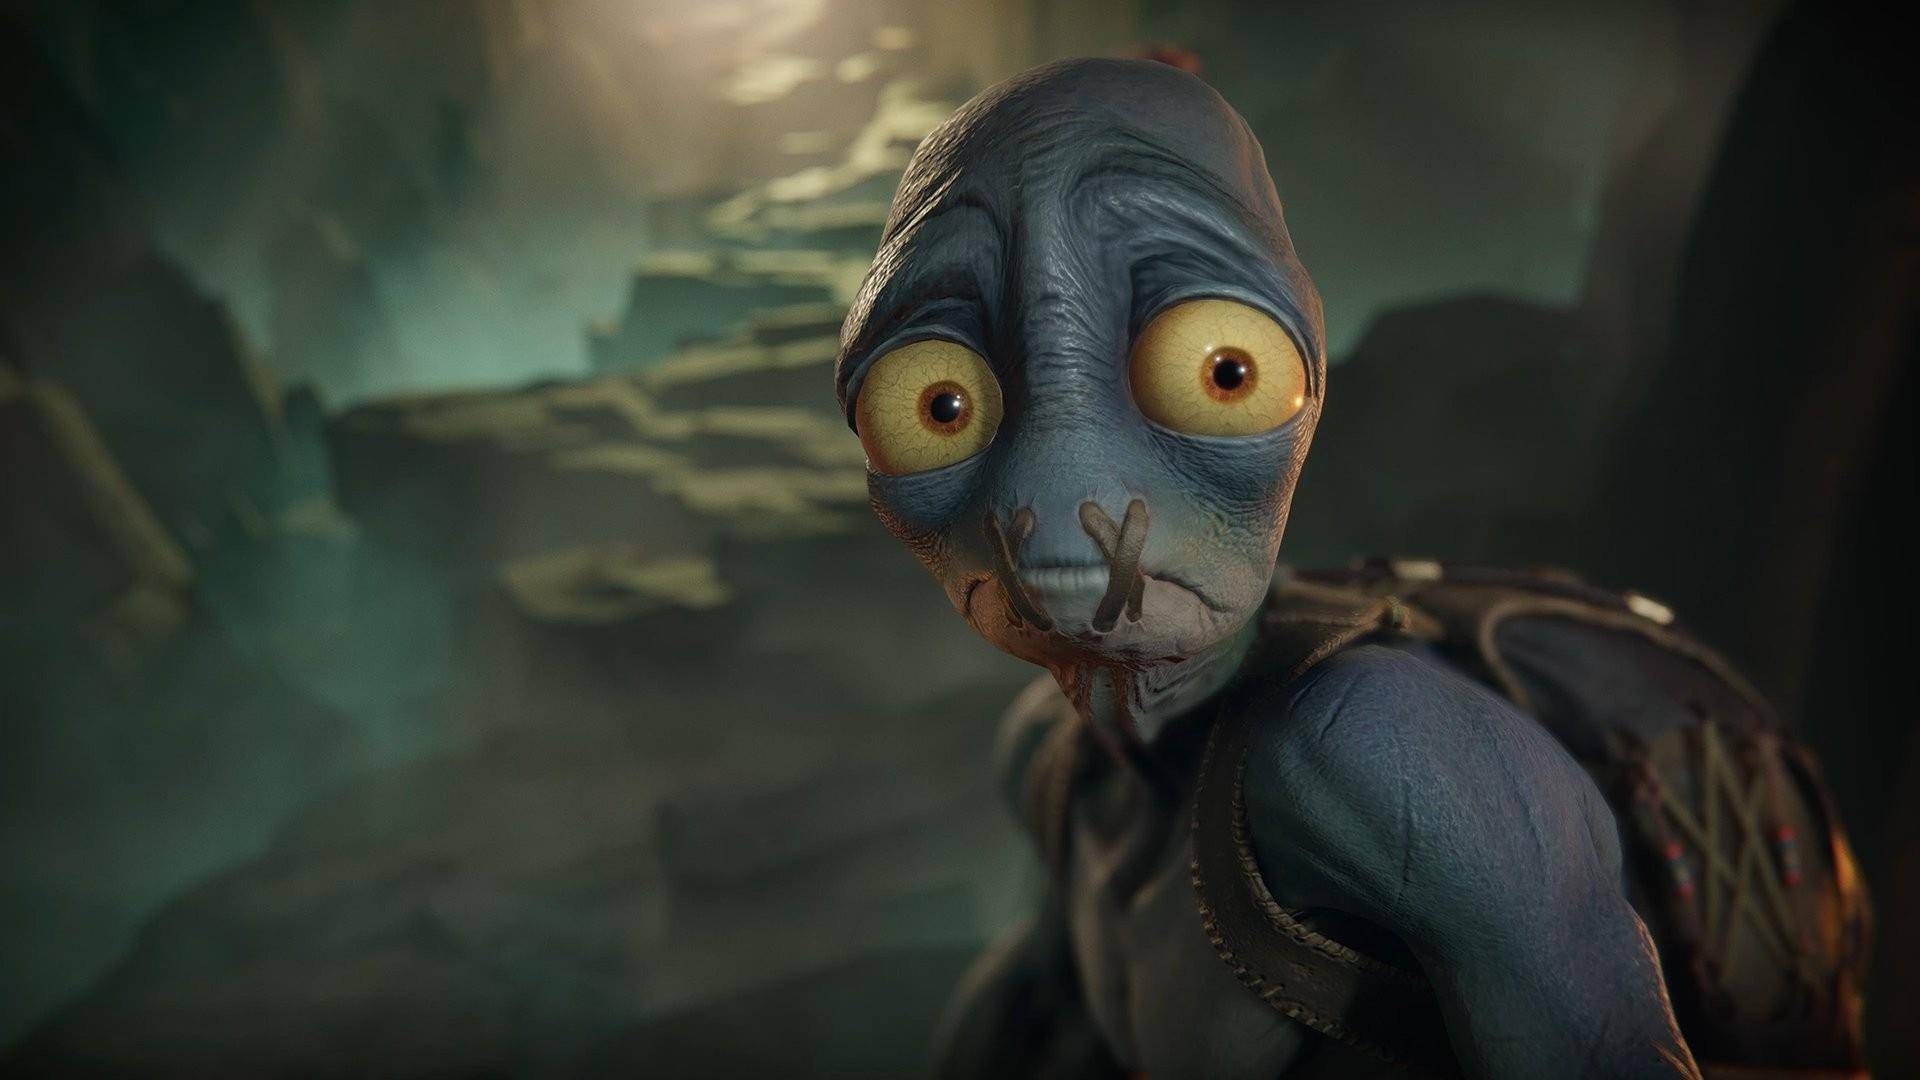 Oddworld: Soulstorm is coming in spring